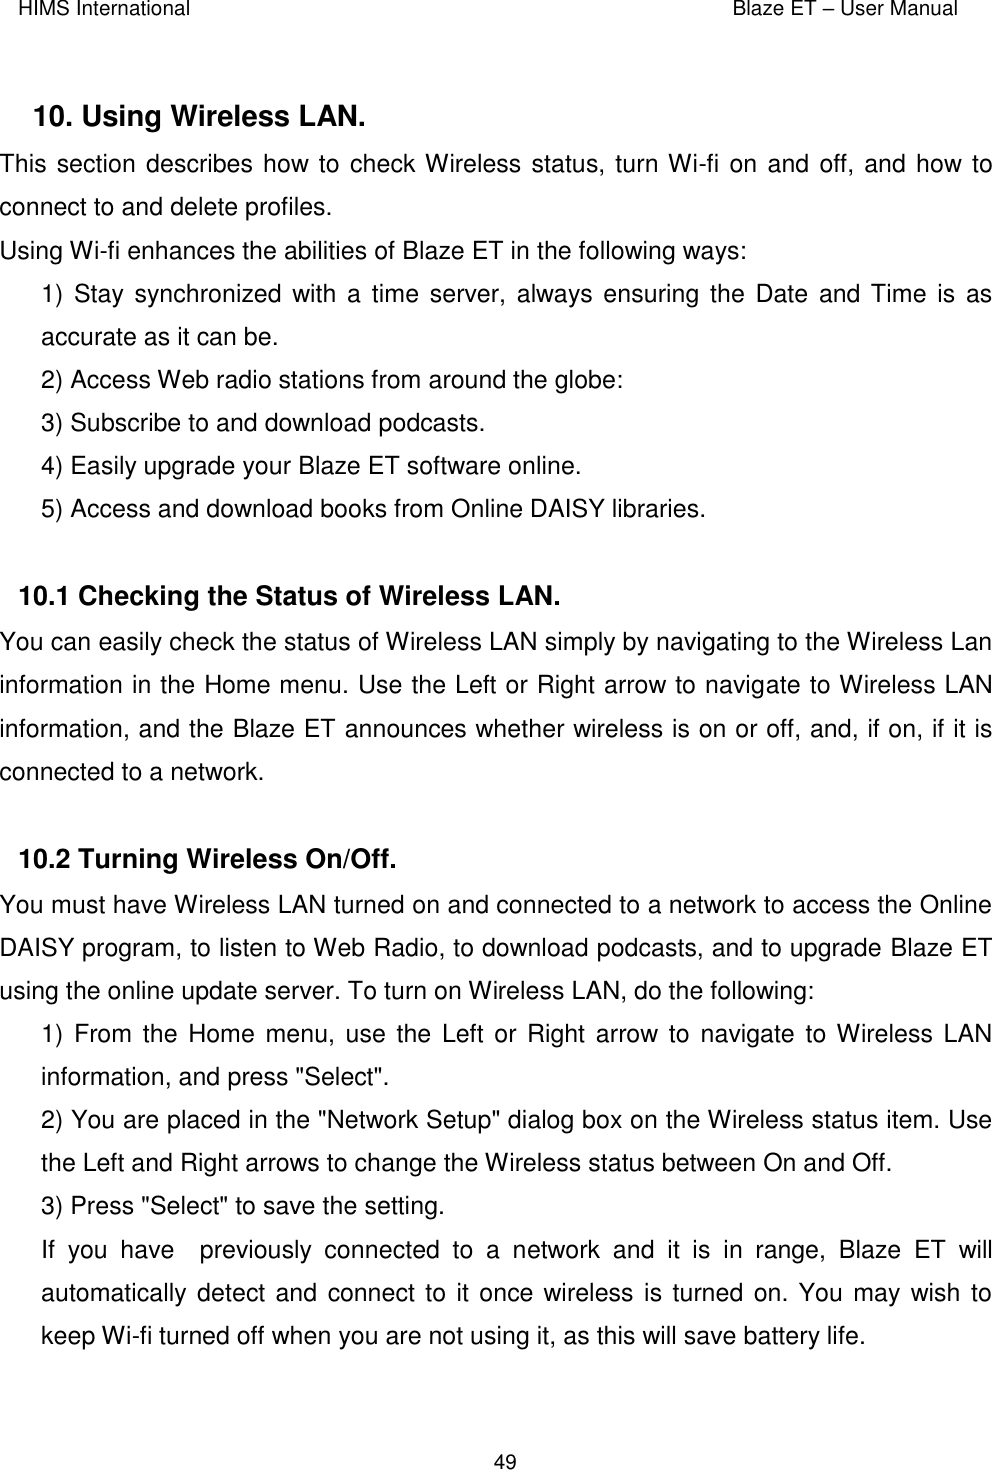 HIMS International    Blaze ET – User Manual      49  10. Using Wireless LAN.  This section describes how to check Wireless status, turn Wi-fi on and off, and how to connect to and delete profiles. Using Wi-fi enhances the abilities of Blaze ET in the following ways: 1) Stay synchronized with  a time server, always  ensuring the Date  and Time is as accurate as it can be. 2) Access Web radio stations from around the globe: 3) Subscribe to and download podcasts. 4) Easily upgrade your Blaze ET software online. 5) Access and download books from Online DAISY libraries.  10.1 Checking the Status of Wireless LAN.  You can easily check the status of Wireless LAN simply by navigating to the Wireless Lan information in the Home menu. Use the Left or Right arrow to navigate to Wireless LAN information, and the Blaze ET announces whether wireless is on or off, and, if on, if it is connected to a network.     10.2 Turning Wireless On/Off.  You must have Wireless LAN turned on and connected to a network to access the Online DAISY program, to listen to Web Radio, to download podcasts, and to upgrade Blaze ET using the online update server. To turn on Wireless LAN, do the following: 1) From the  Home menu, use  the Left or Right  arrow to  navigate  to Wireless LAN information, and press &quot;Select&quot;. 2) You are placed in the &quot;Network Setup&quot; dialog box on the Wireless status item. Use the Left and Right arrows to change the Wireless status between On and Off. 3) Press &quot;Select&quot; to save the setting. If  you  have    previously  connected  to  a  network  and  it  is  in  range,  Blaze  ET  will automatically detect and connect to it once wireless is  turned on. You may wish to keep Wi-fi turned off when you are not using it, as this will save battery life.  